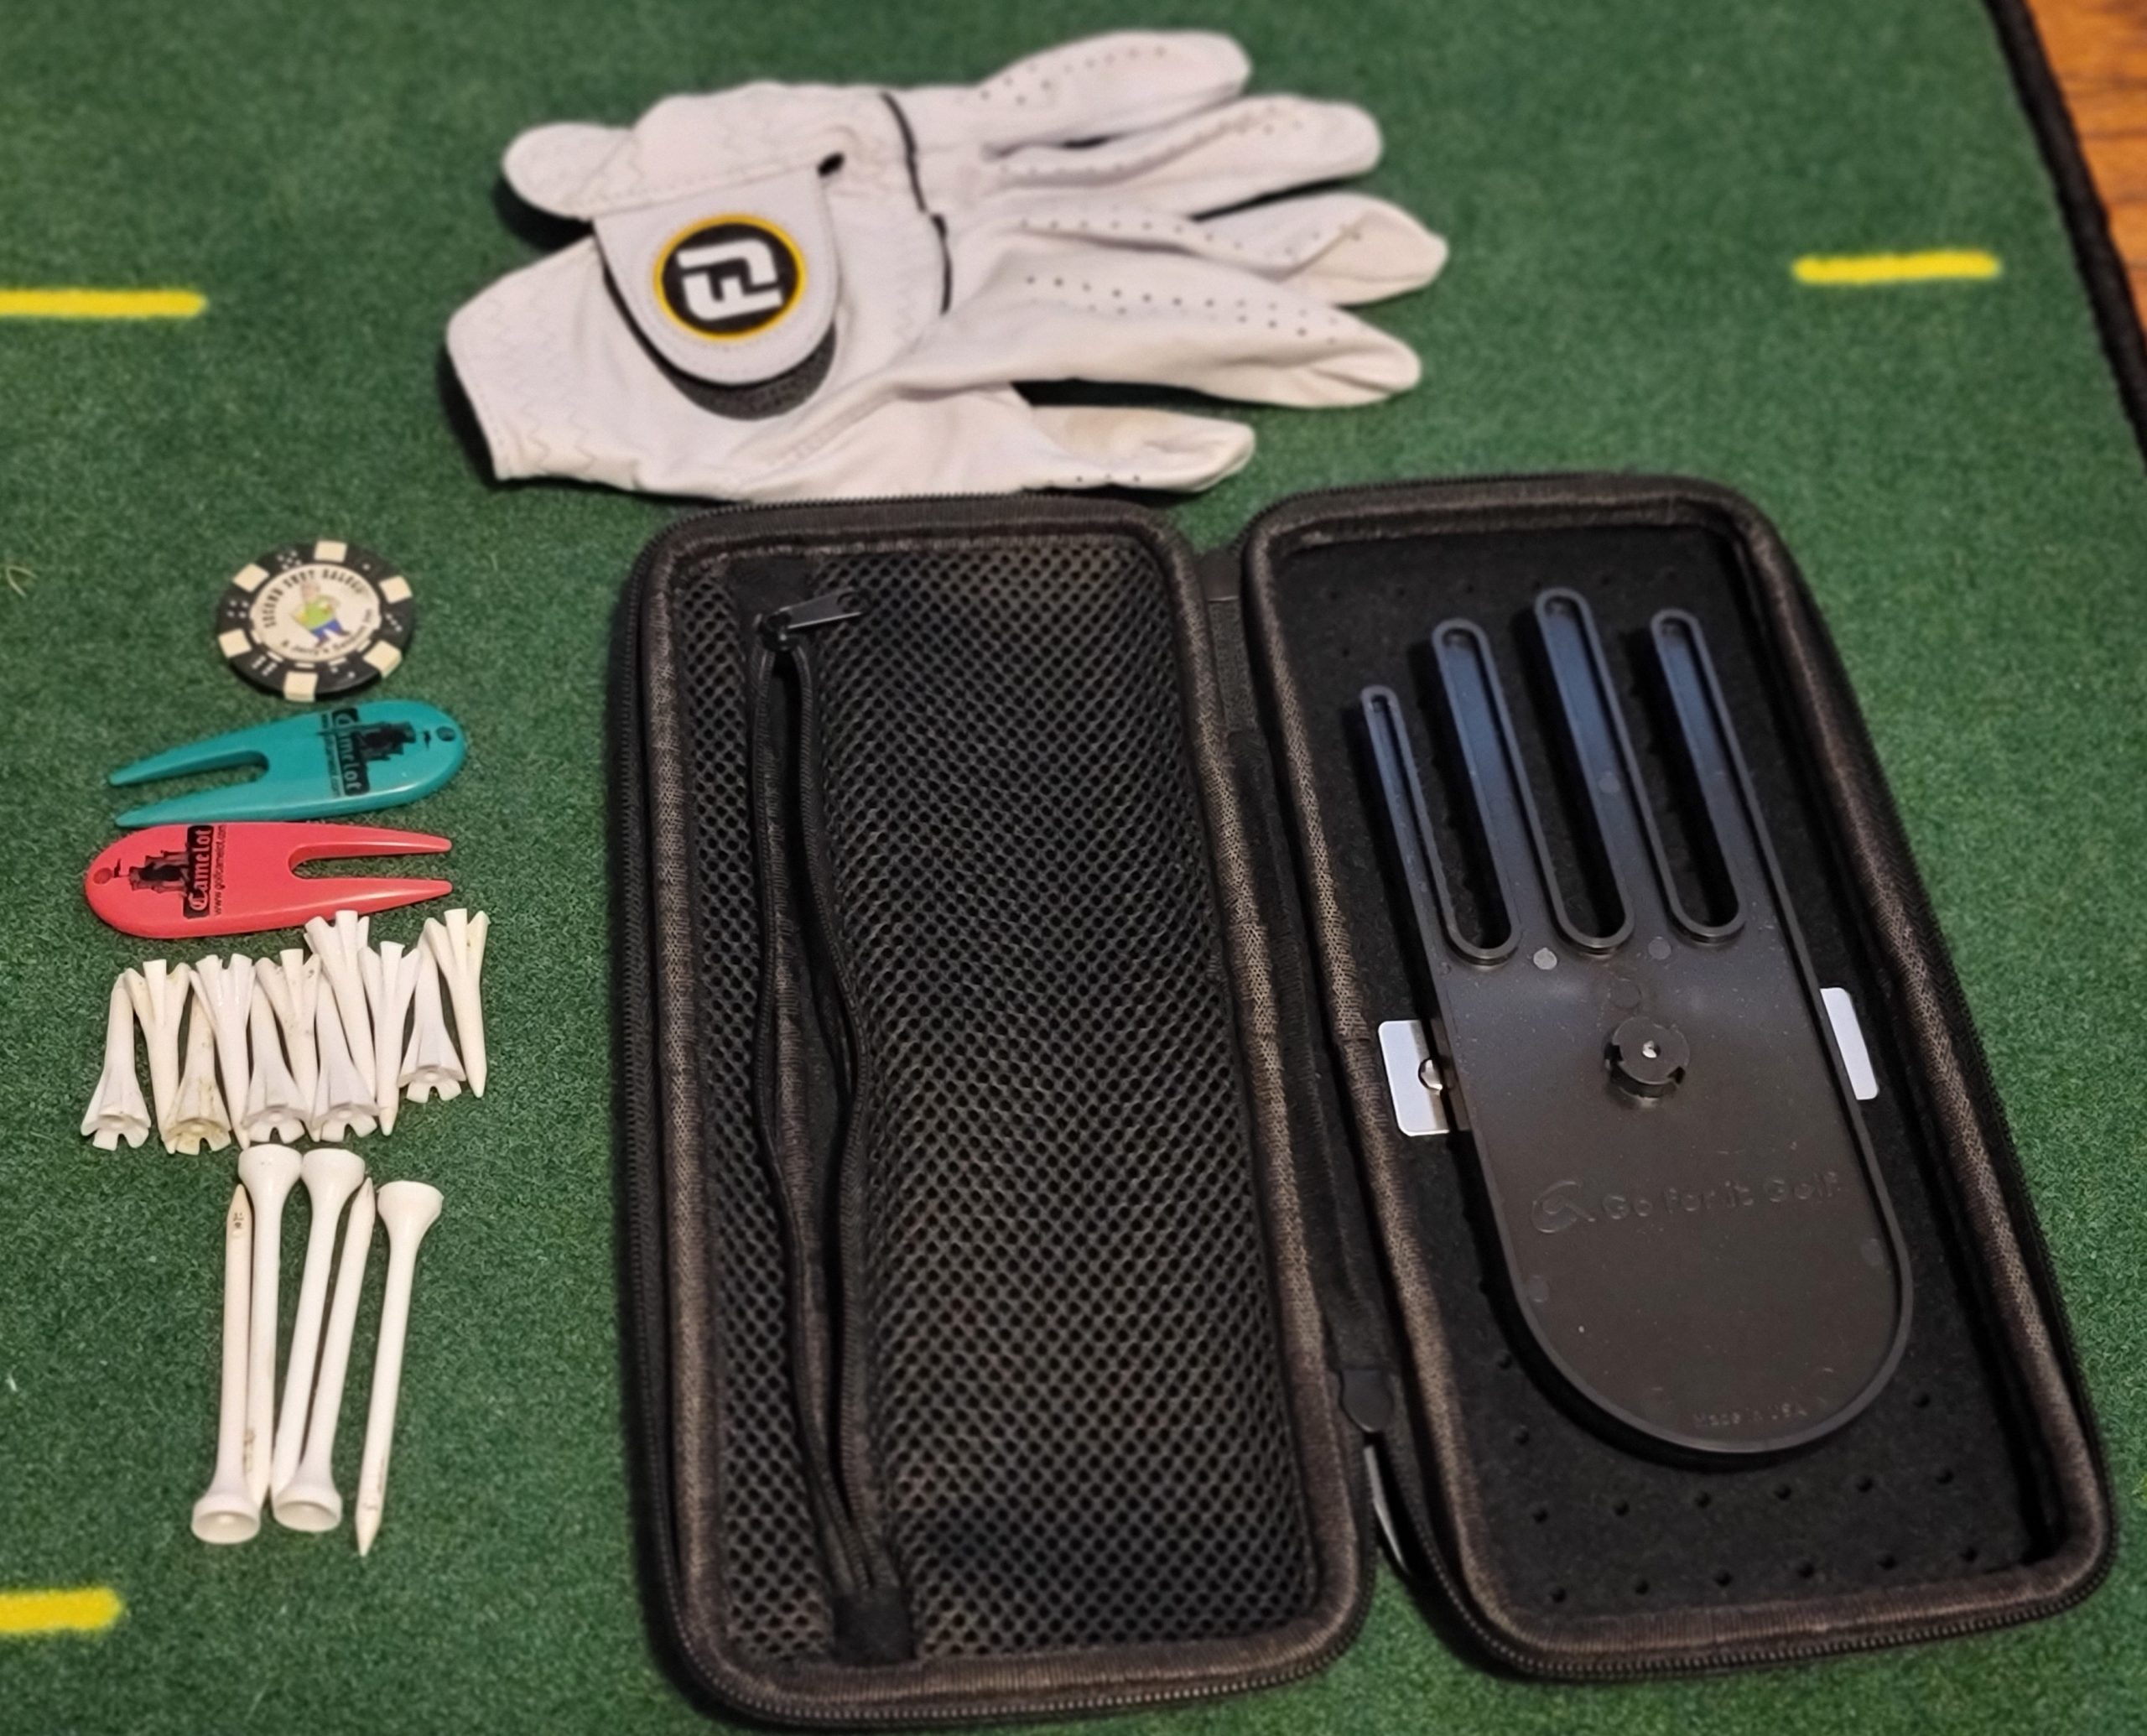 Old Duffer Golf image of a Go for it Golf case and glove dryer shaper